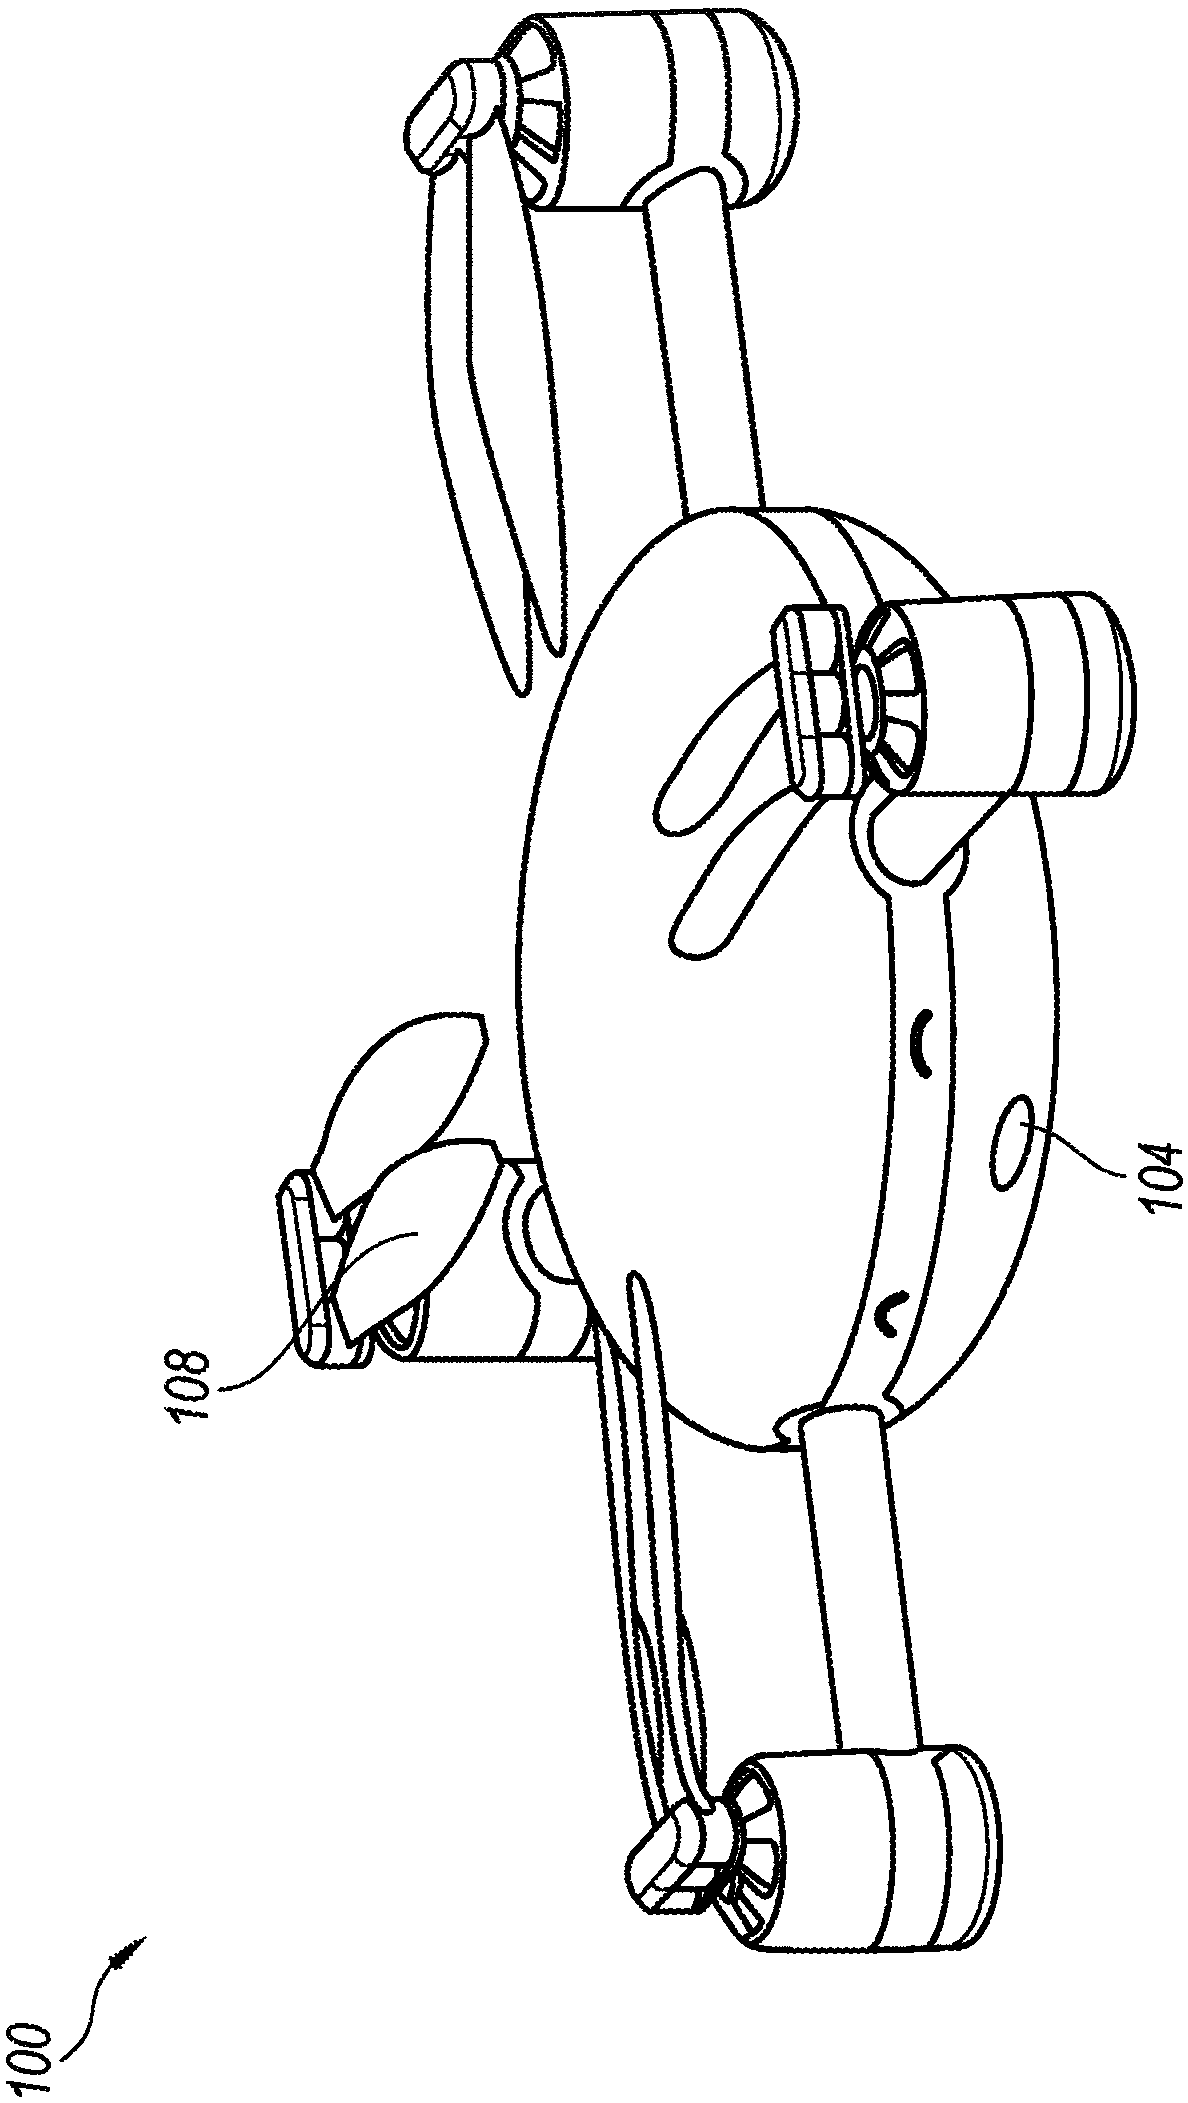 External microphone for an unmanned aerial vehicle